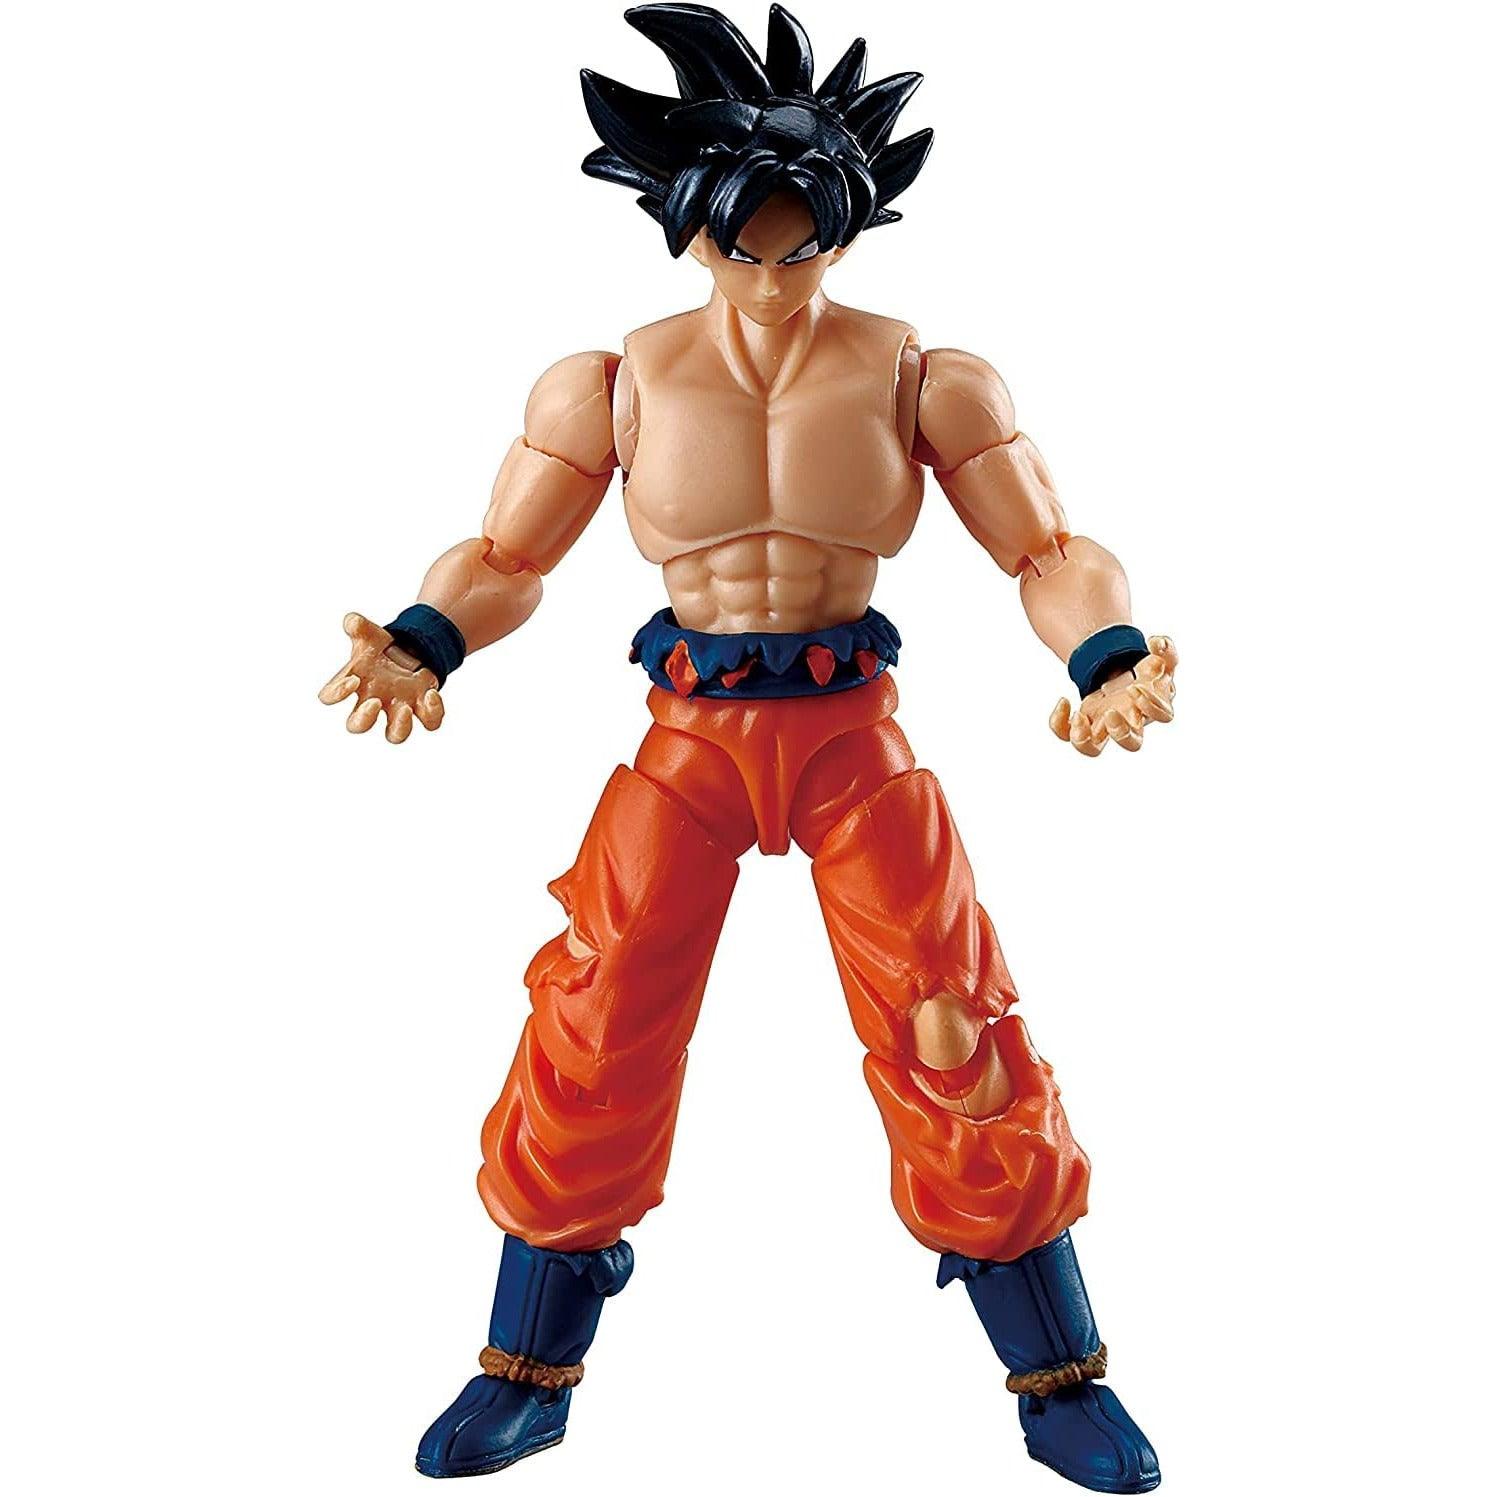 Bandai America - Dragon Ball Evolve 5 Action Figure Ultra Instinct Goku - BumbleToys - 6+ Years, 6-8 years, Action Figures, Boys, Characters, Dolls, Figures, OXE, Pre-Order